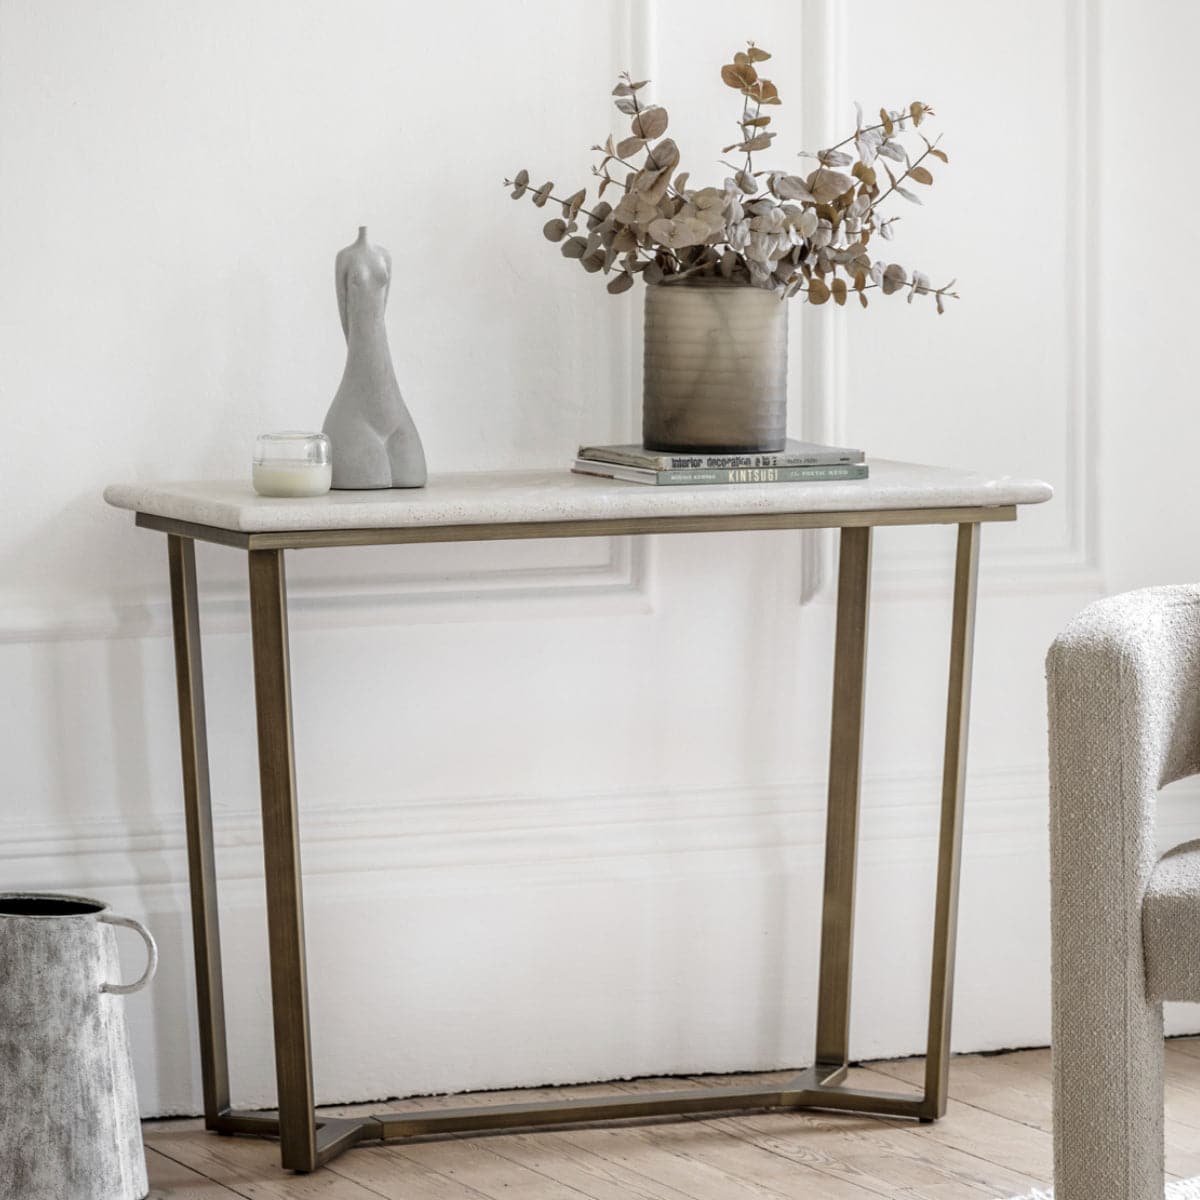 Faux Travertine Topped Antique Bronze Legged Console Table - The Farthing